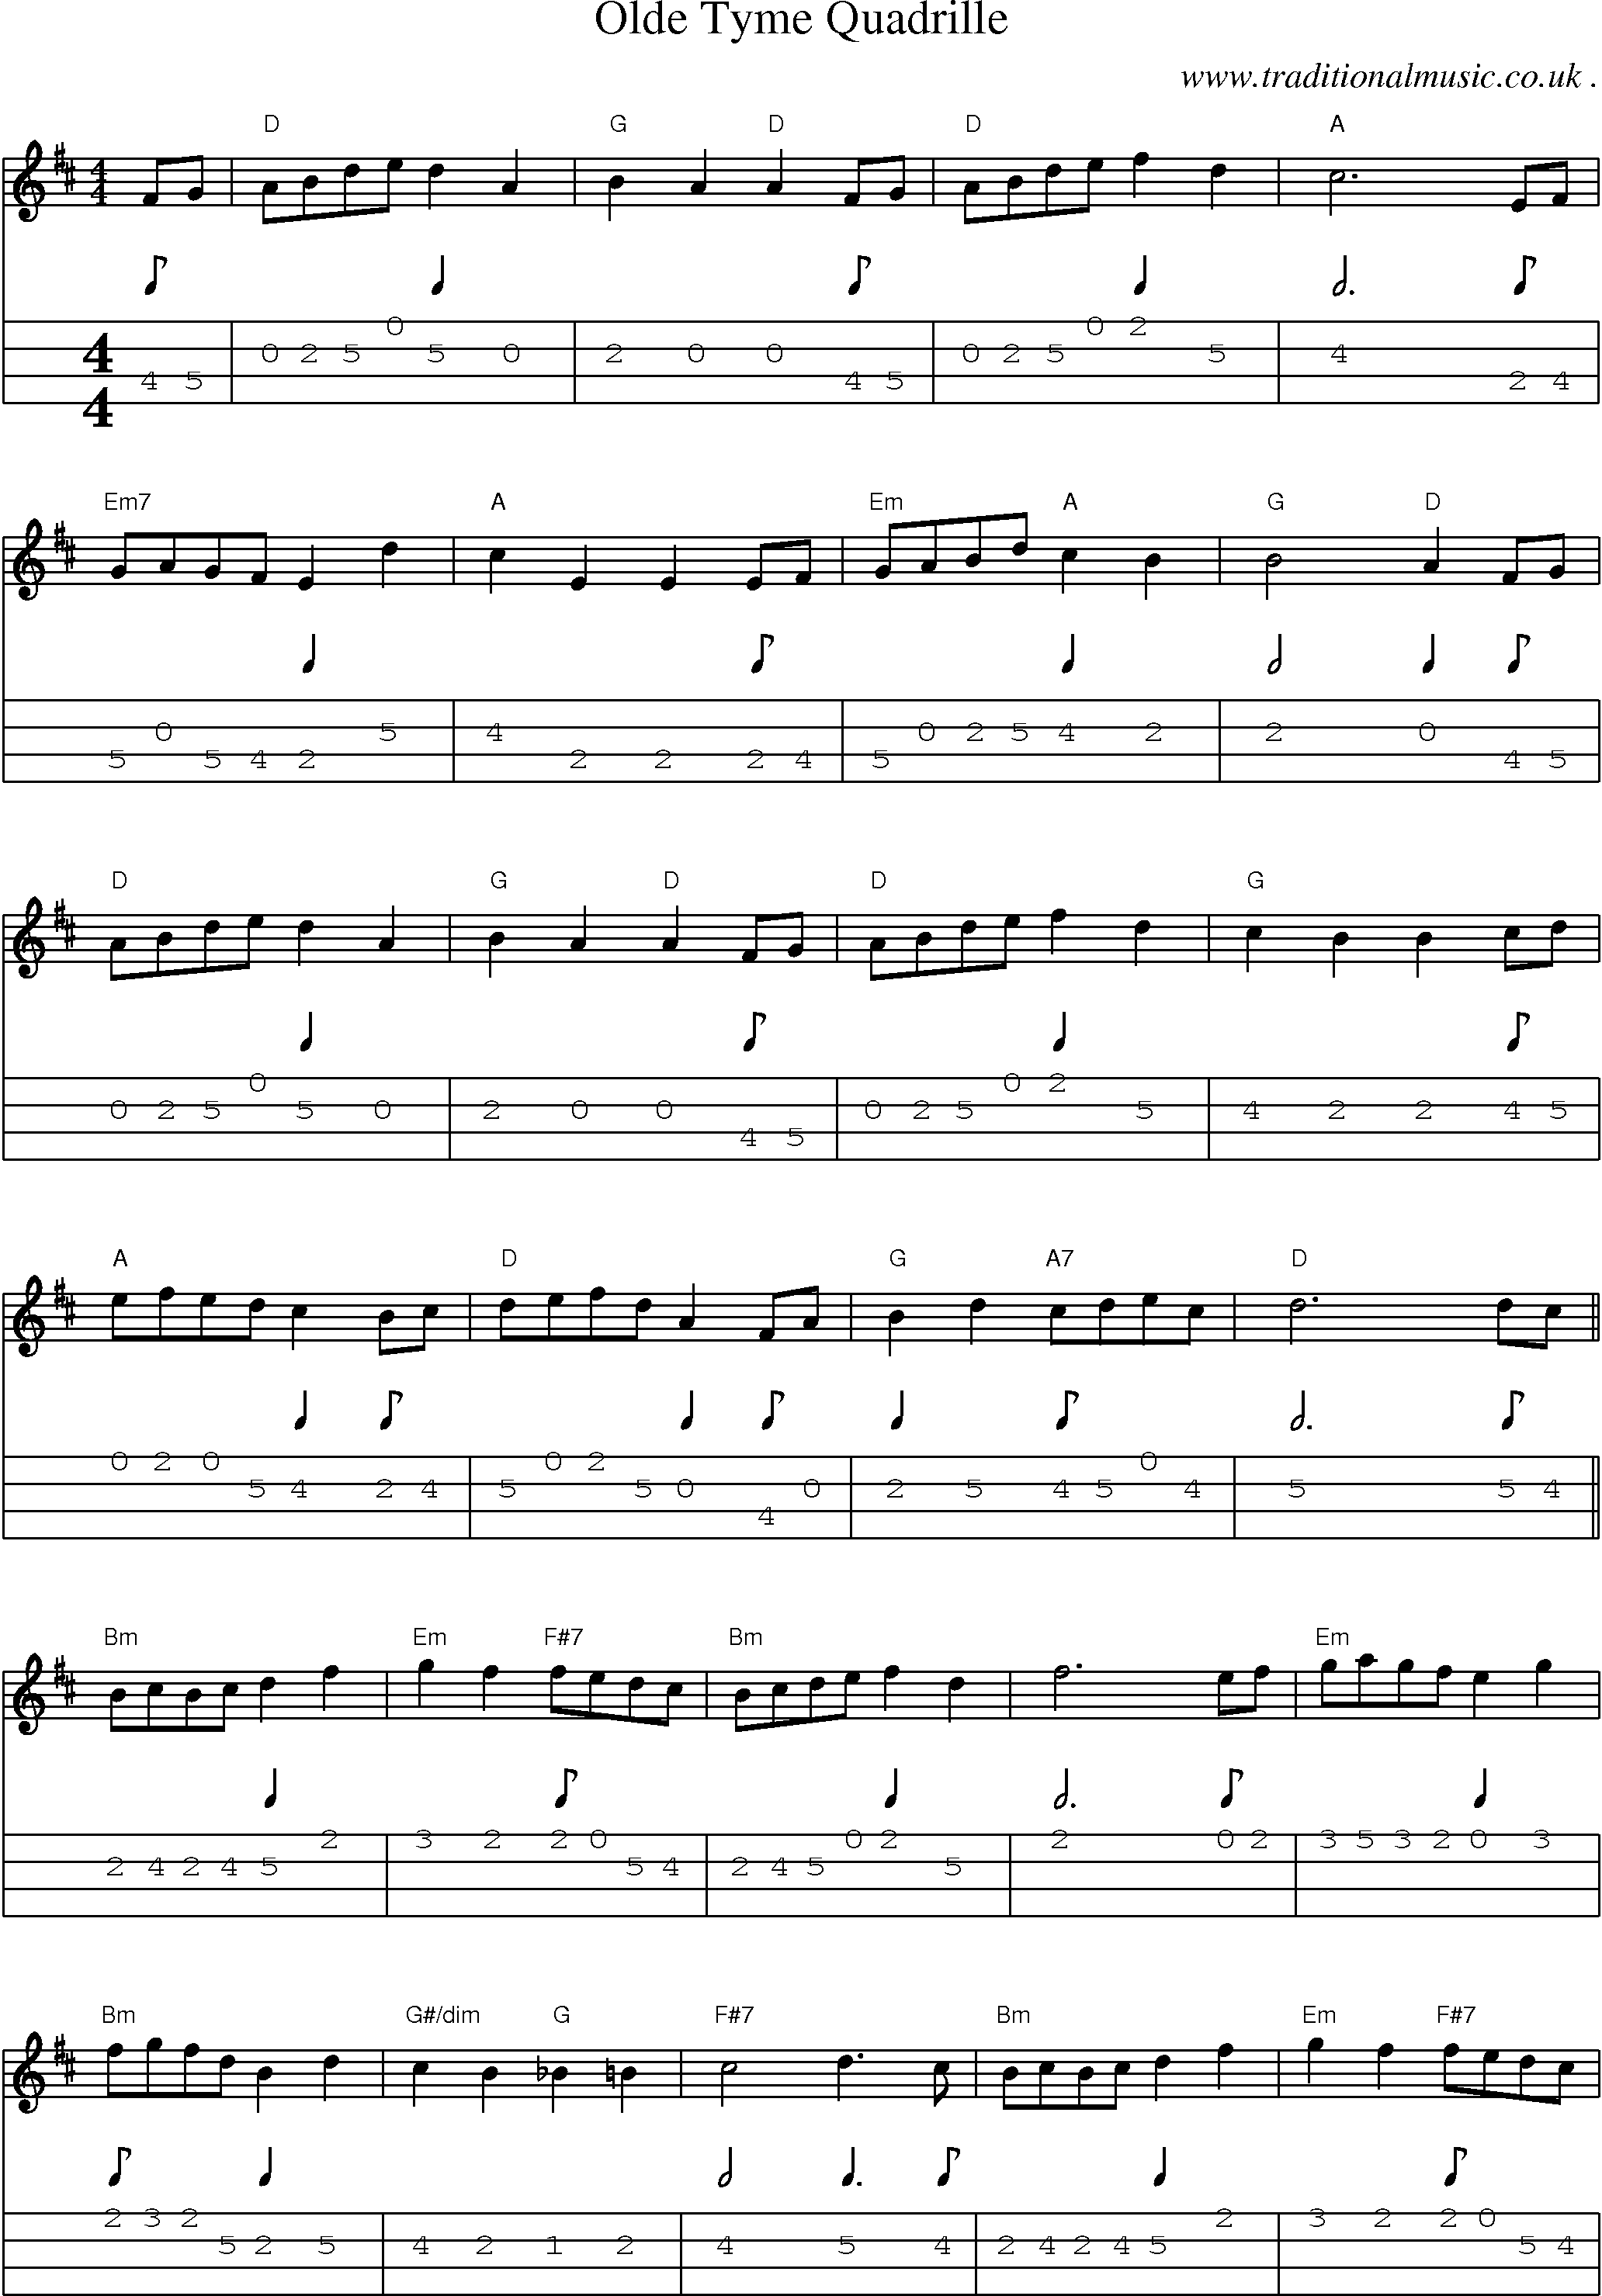 Music Score and Mandolin Tabs for Olde Tyme Quadrille